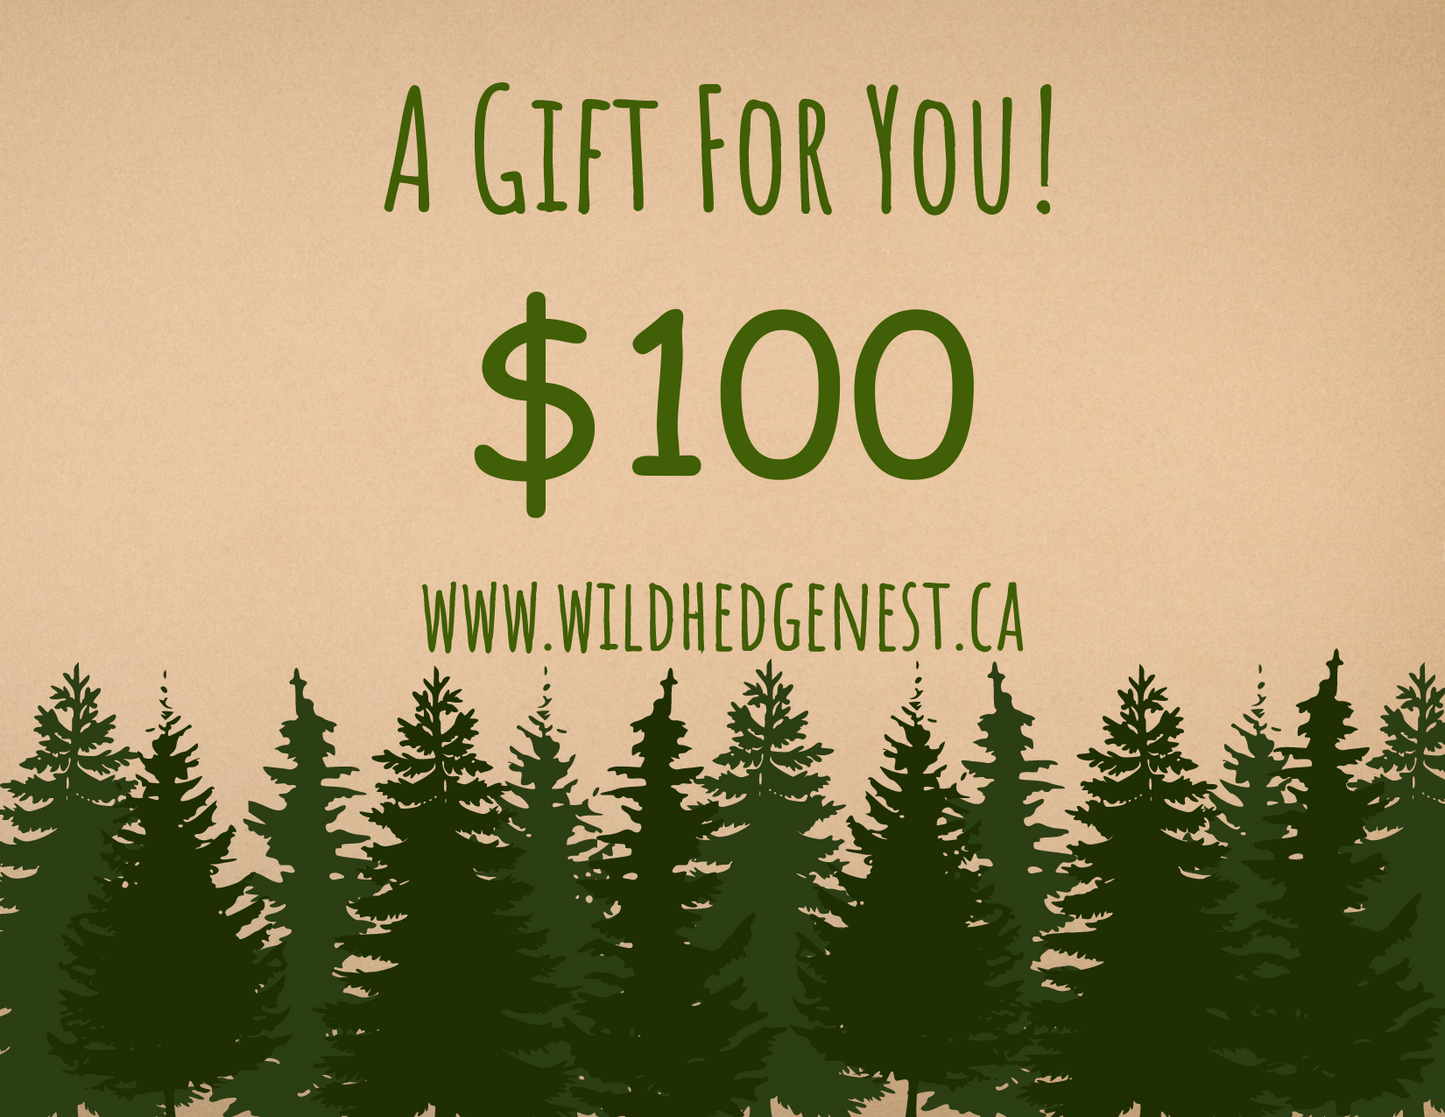 5 $100 WILD HEDGE NEST FOREST e-GIFT CARD